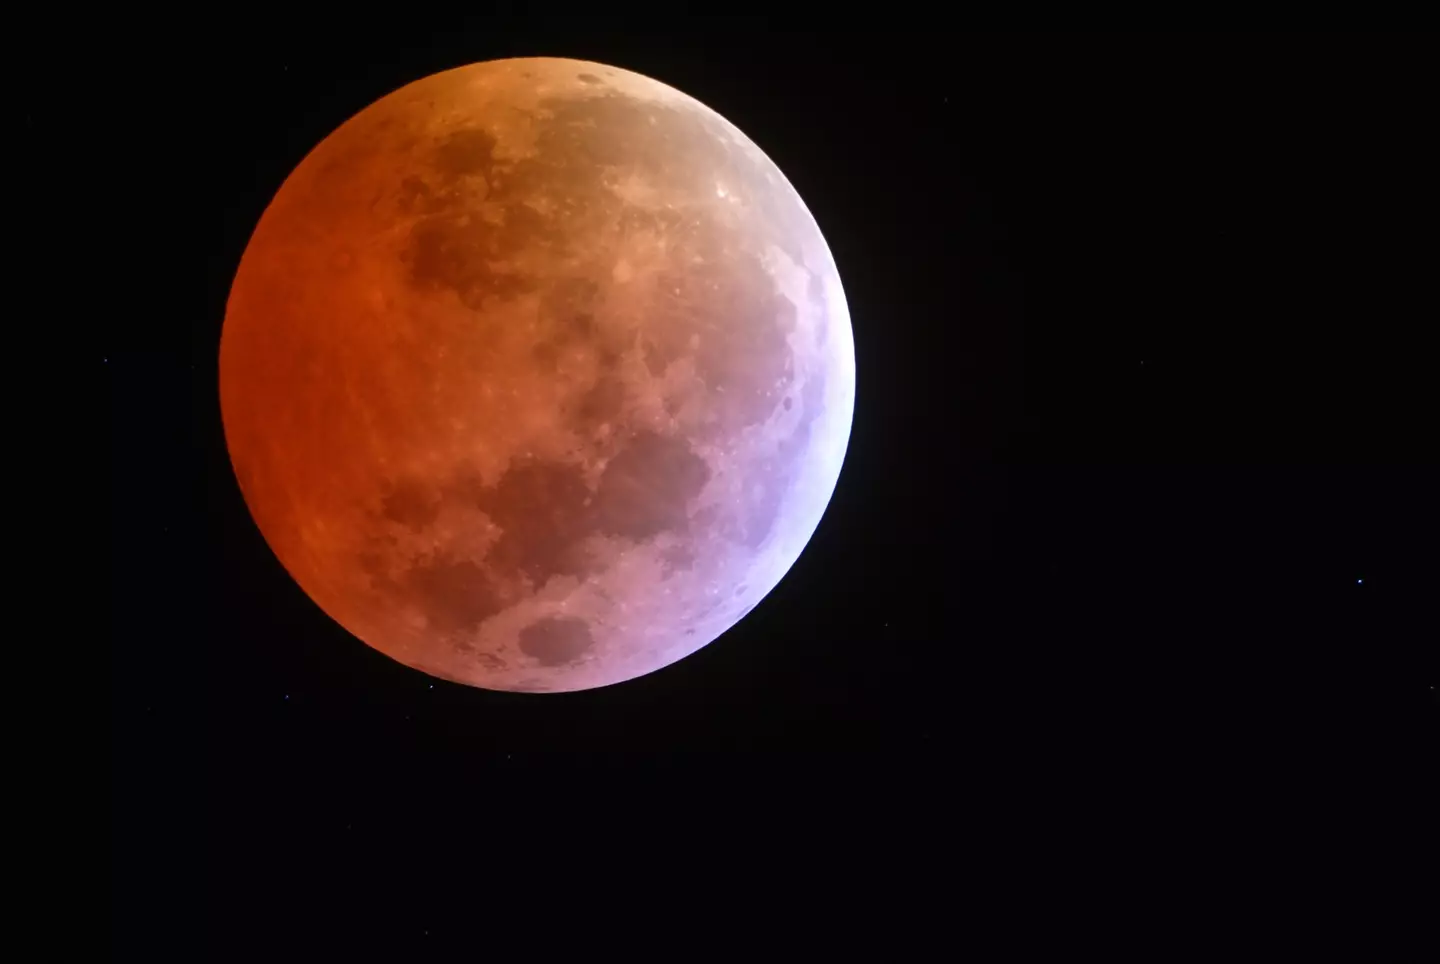 A total lunar eclipse is certainly a cool sight to see.